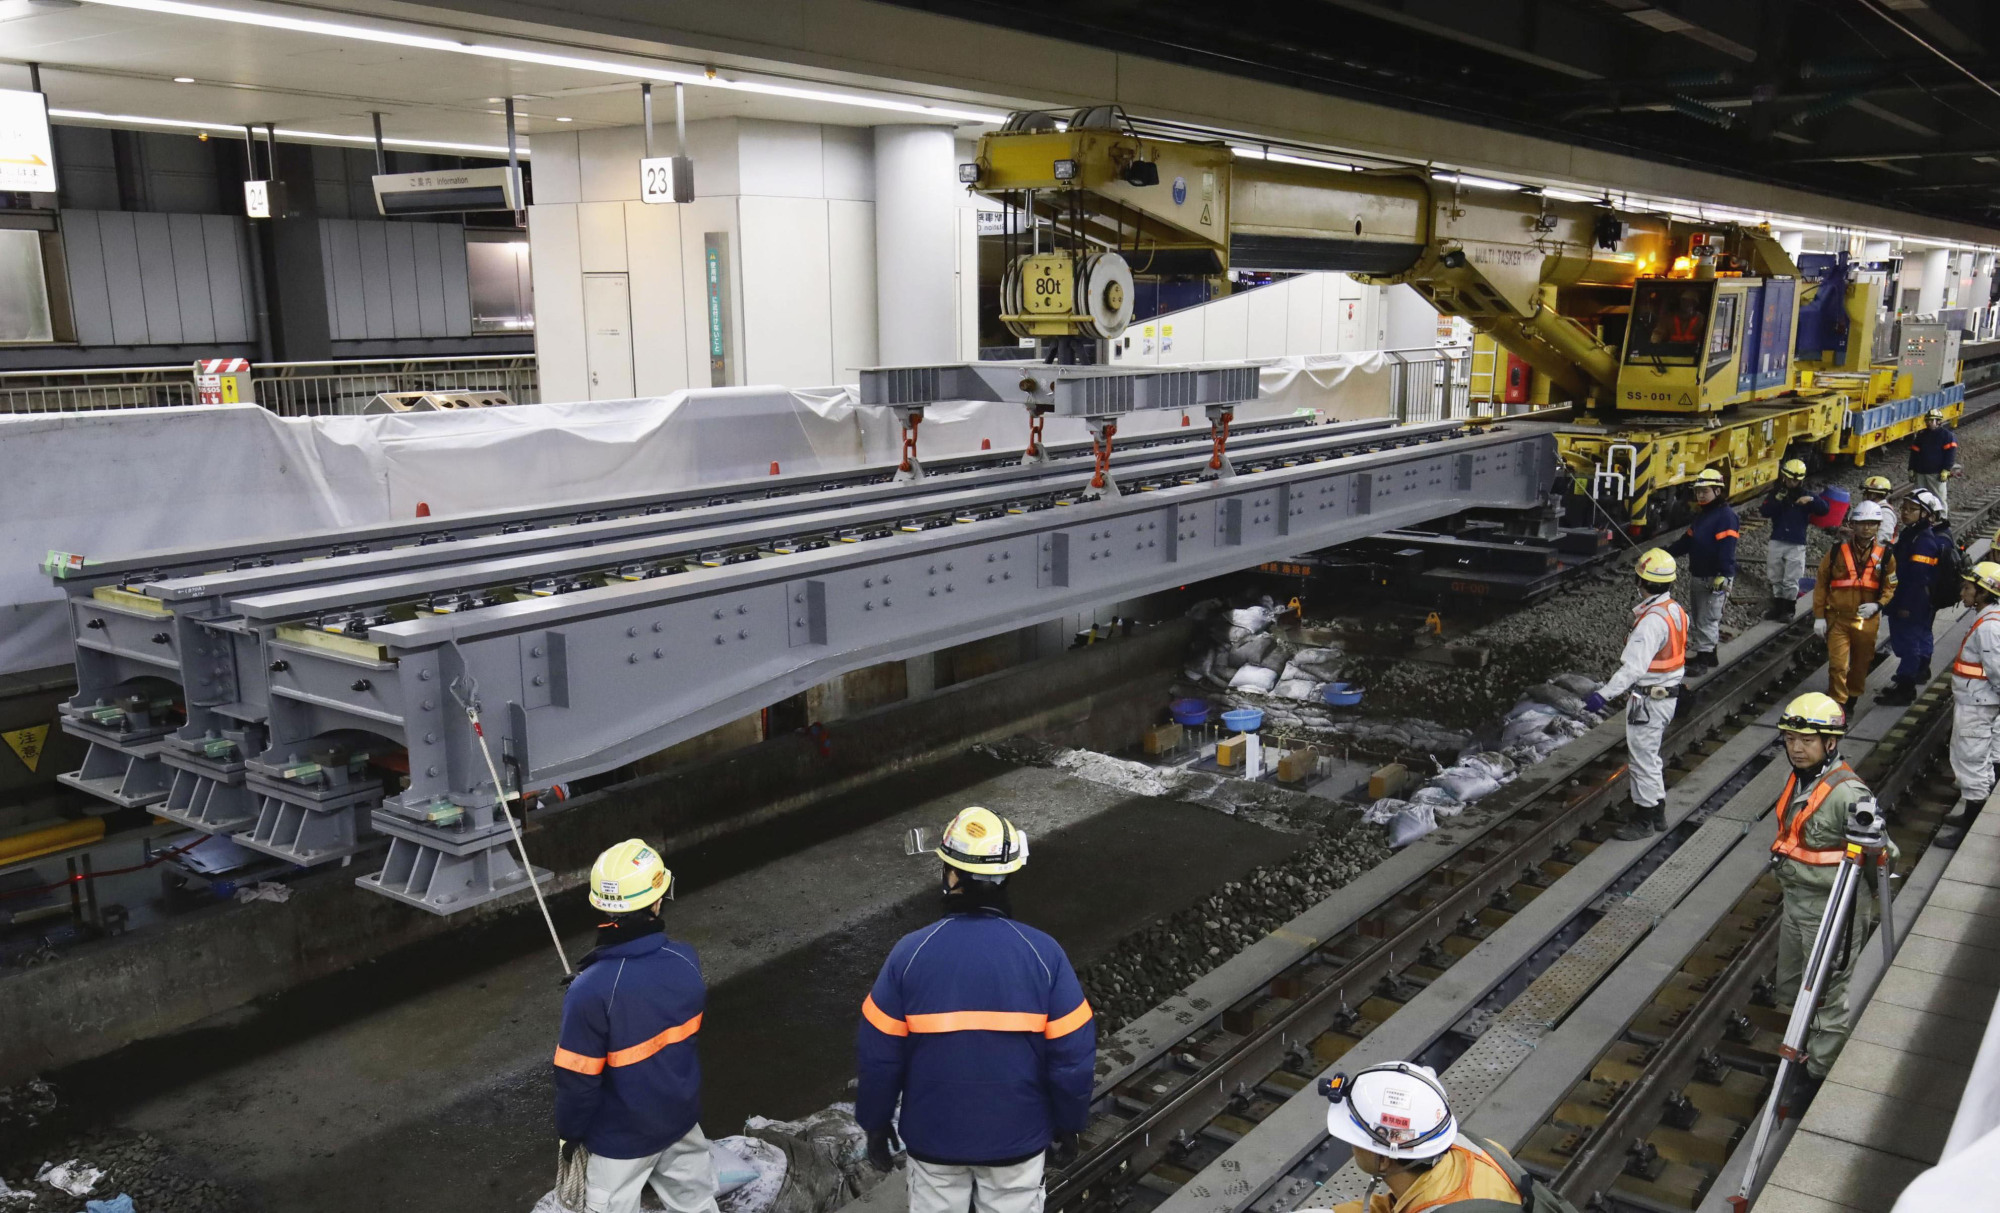 Construction work at Shinagawa Station for the maglev train project is seen in November. | KYODO